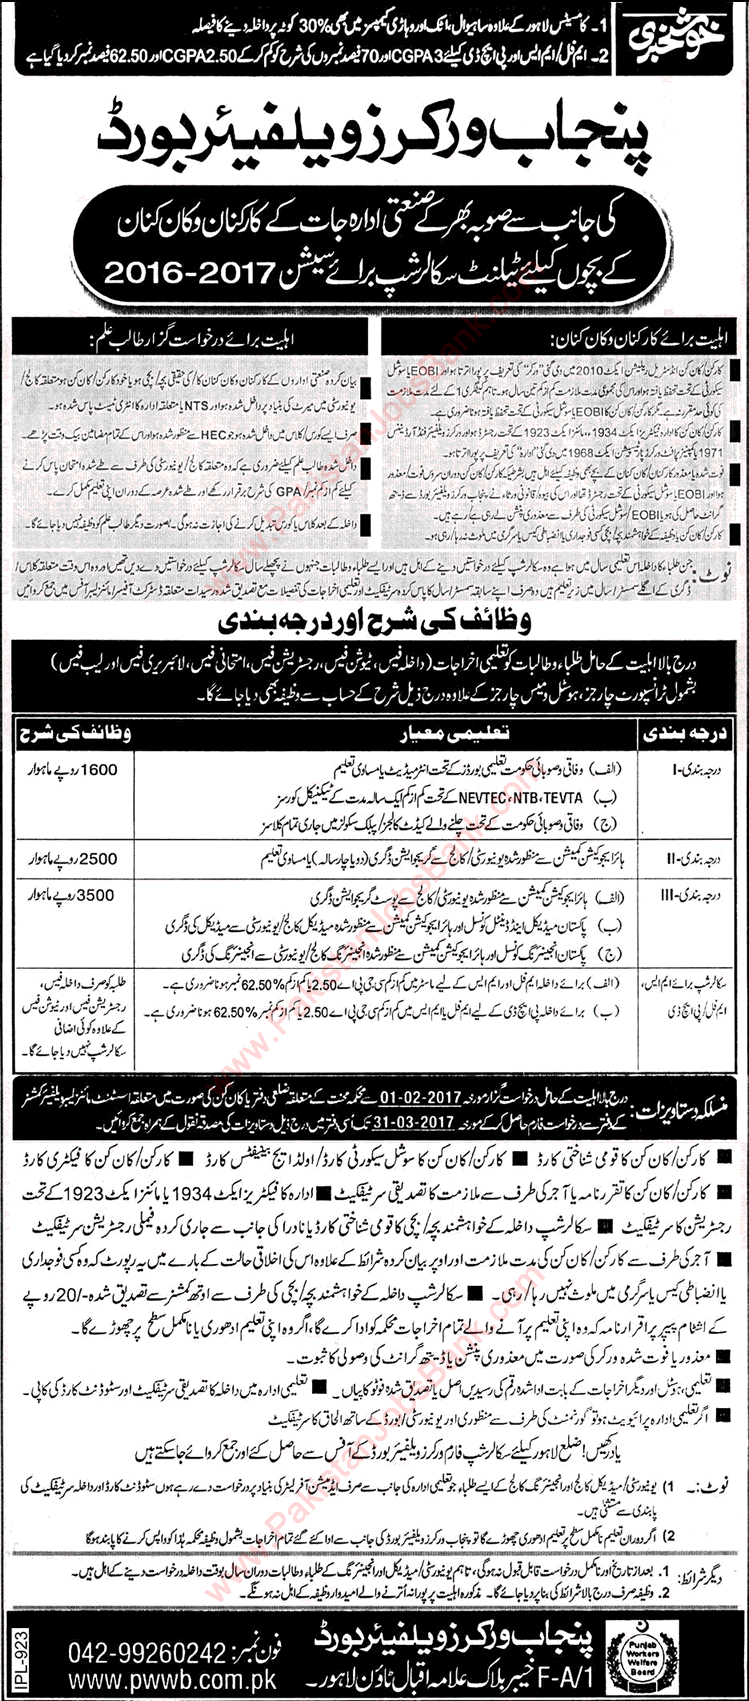 Punjab Workers Welfare Board Talent Scholarships 2016-2017 for Wards of Workers Latest